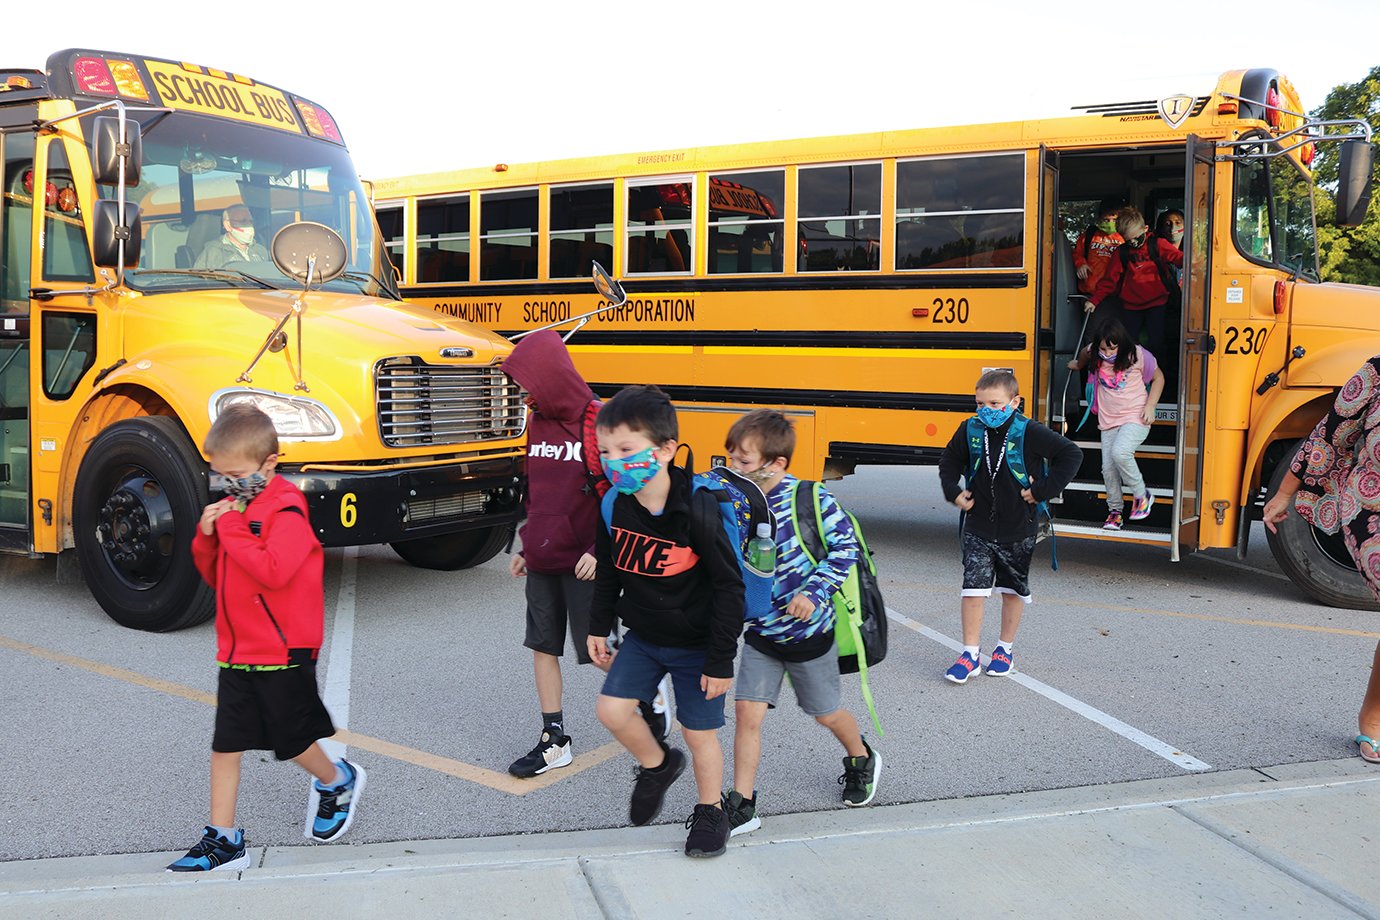 New Market Elementary students, anxious to begin their first day of school Thursday, head toward the entrance from buses that were visibly half full to promote social distancing during the ongoing coronavirus (COVID-19) pandemic.